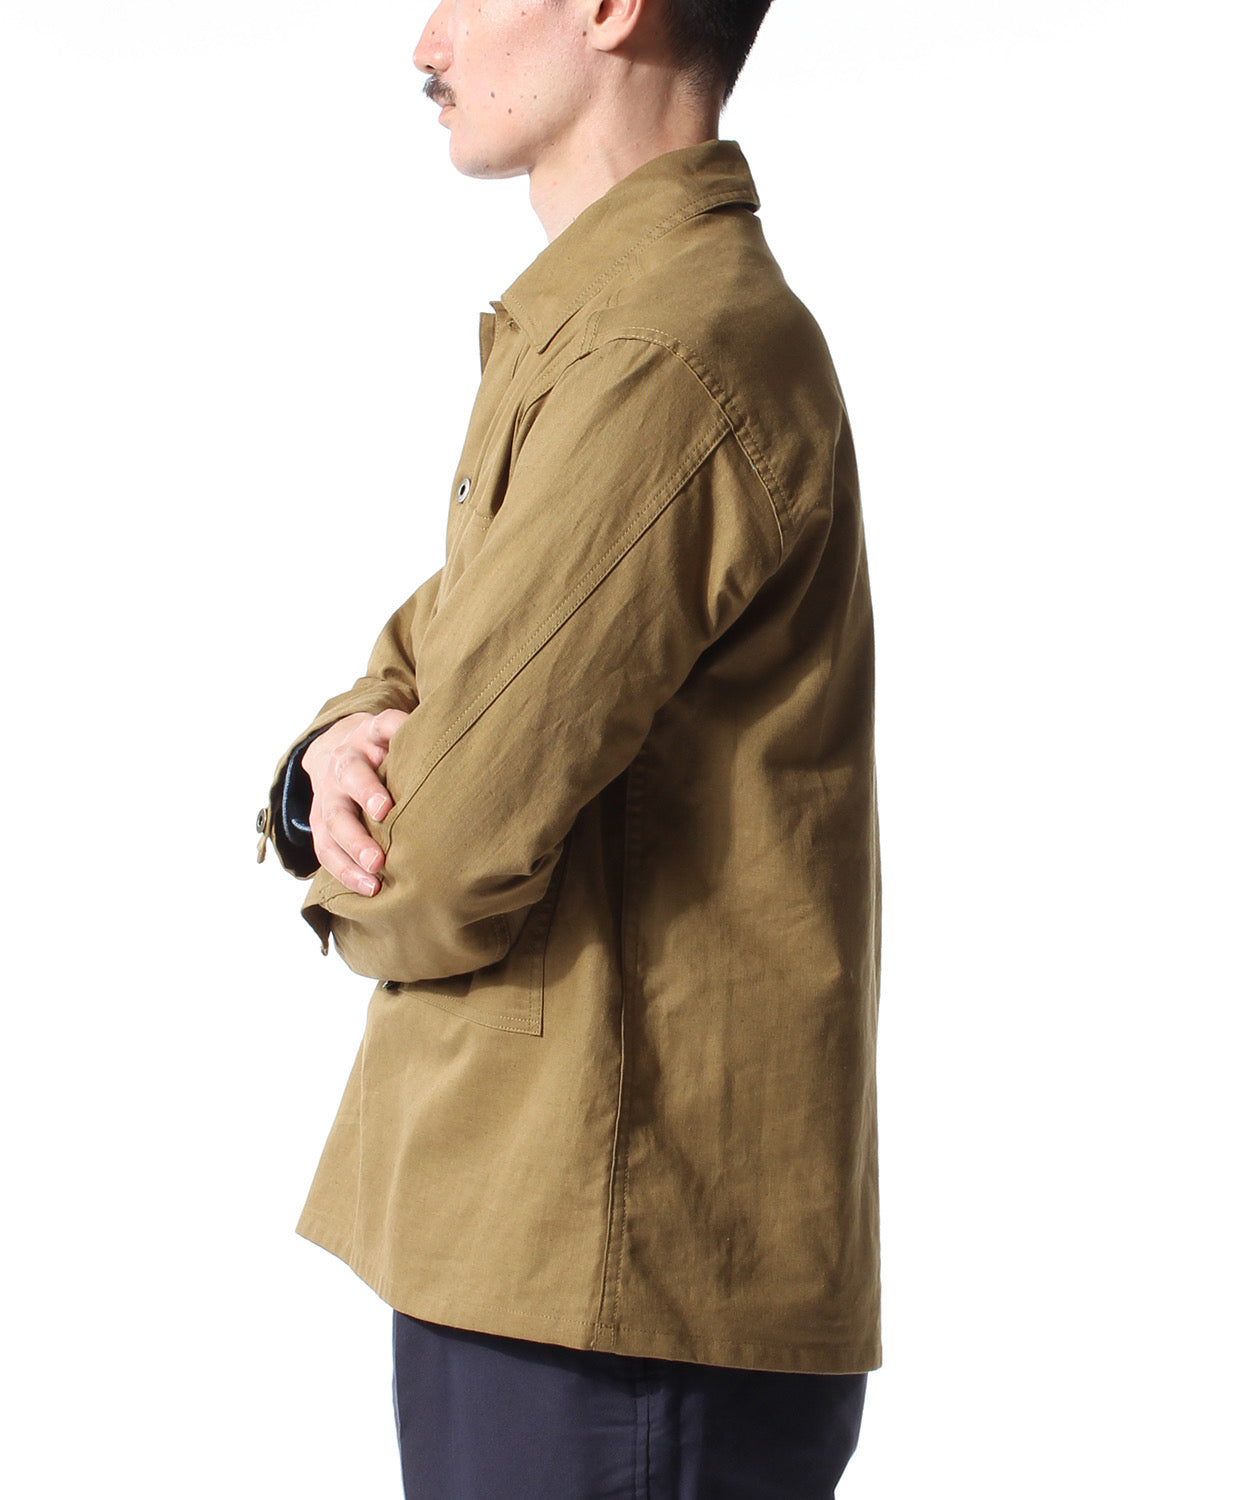 【ANATOMICA】1918 PULLOVER ARMY TWILL / OLIVE DRAB